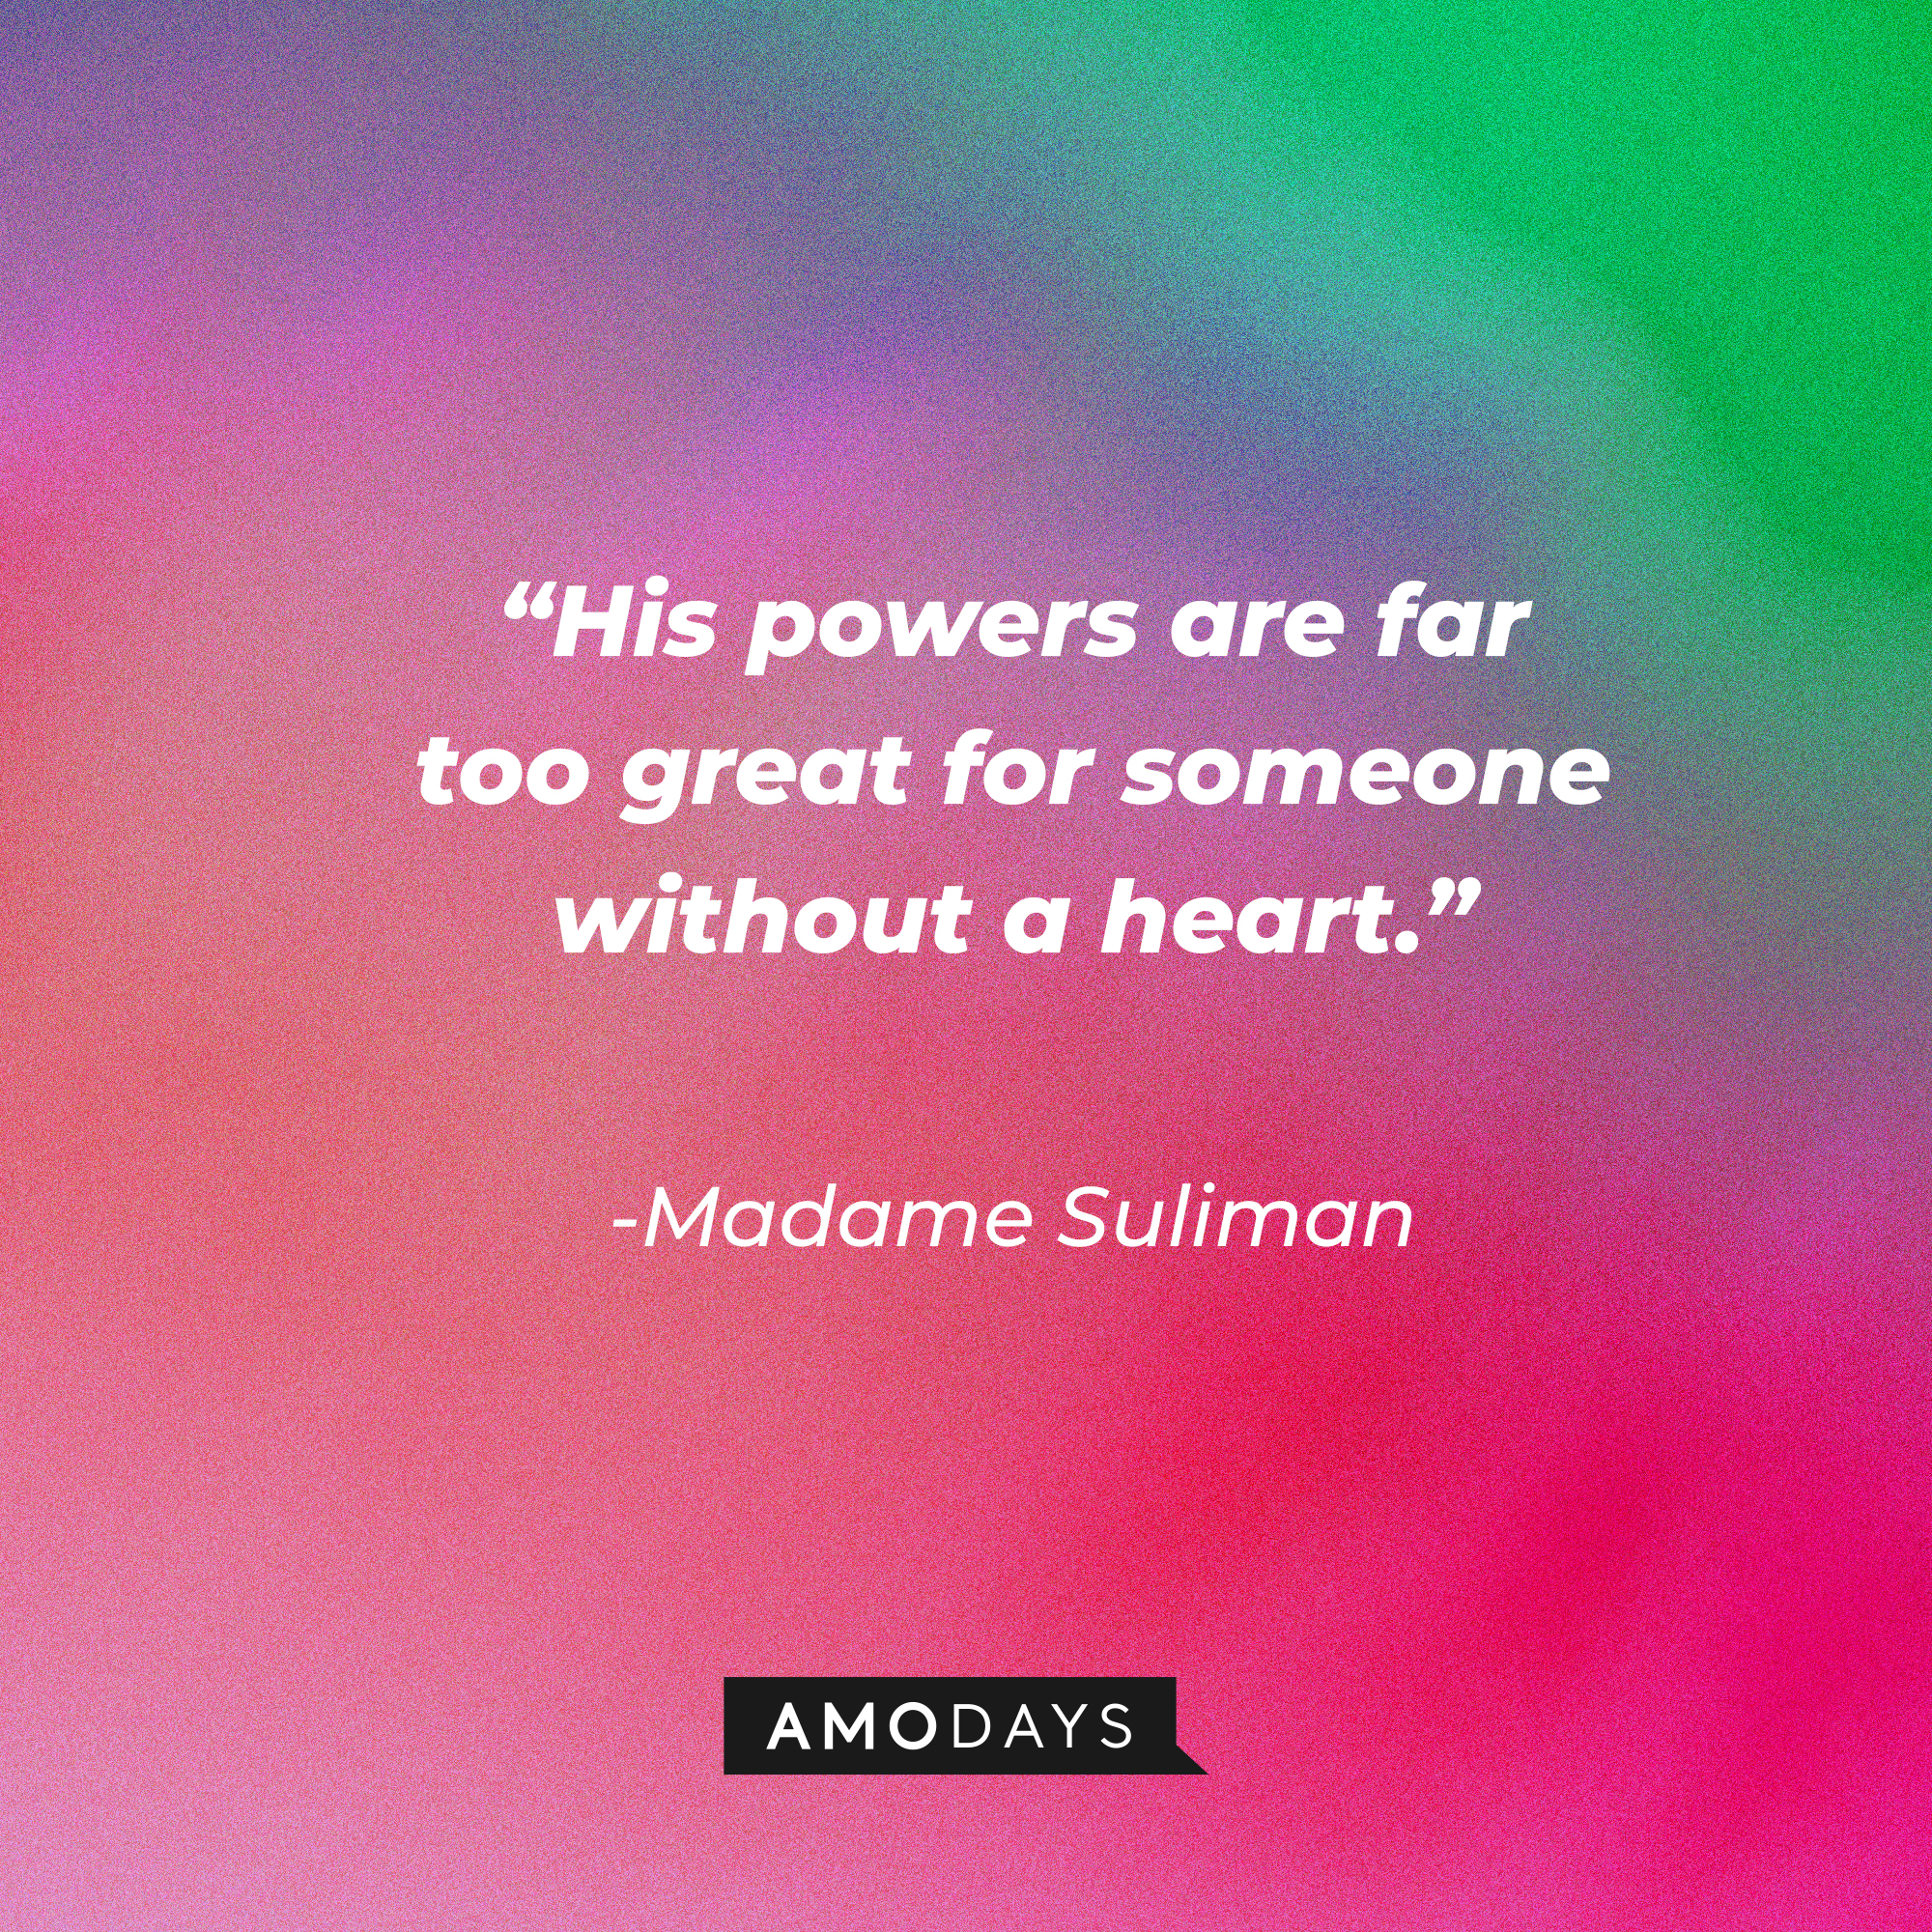 Madame Sulimani’s quote: "His powers are far too great for someone without a heart.” | Source: AmoDays